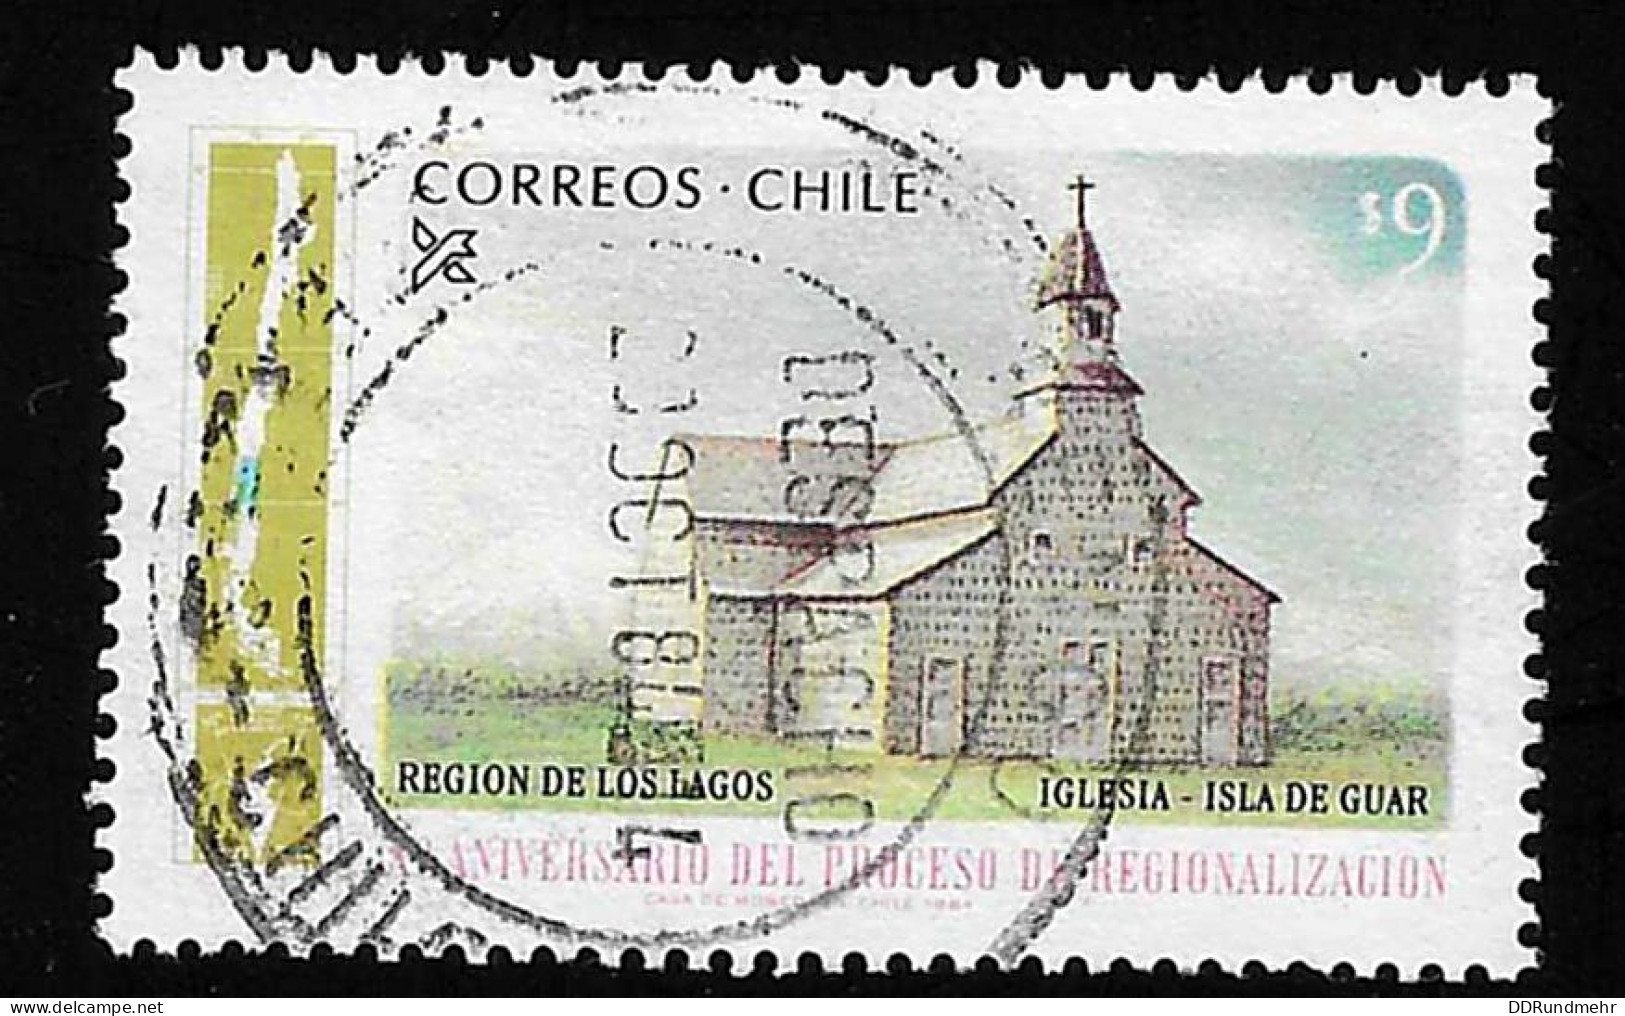 1984 Los Lagos  Michel CL 1056 Stamp Number CL 674l Yvert Et Tellier CL 668 Stanley Gibbons CL 984 Used - Chili